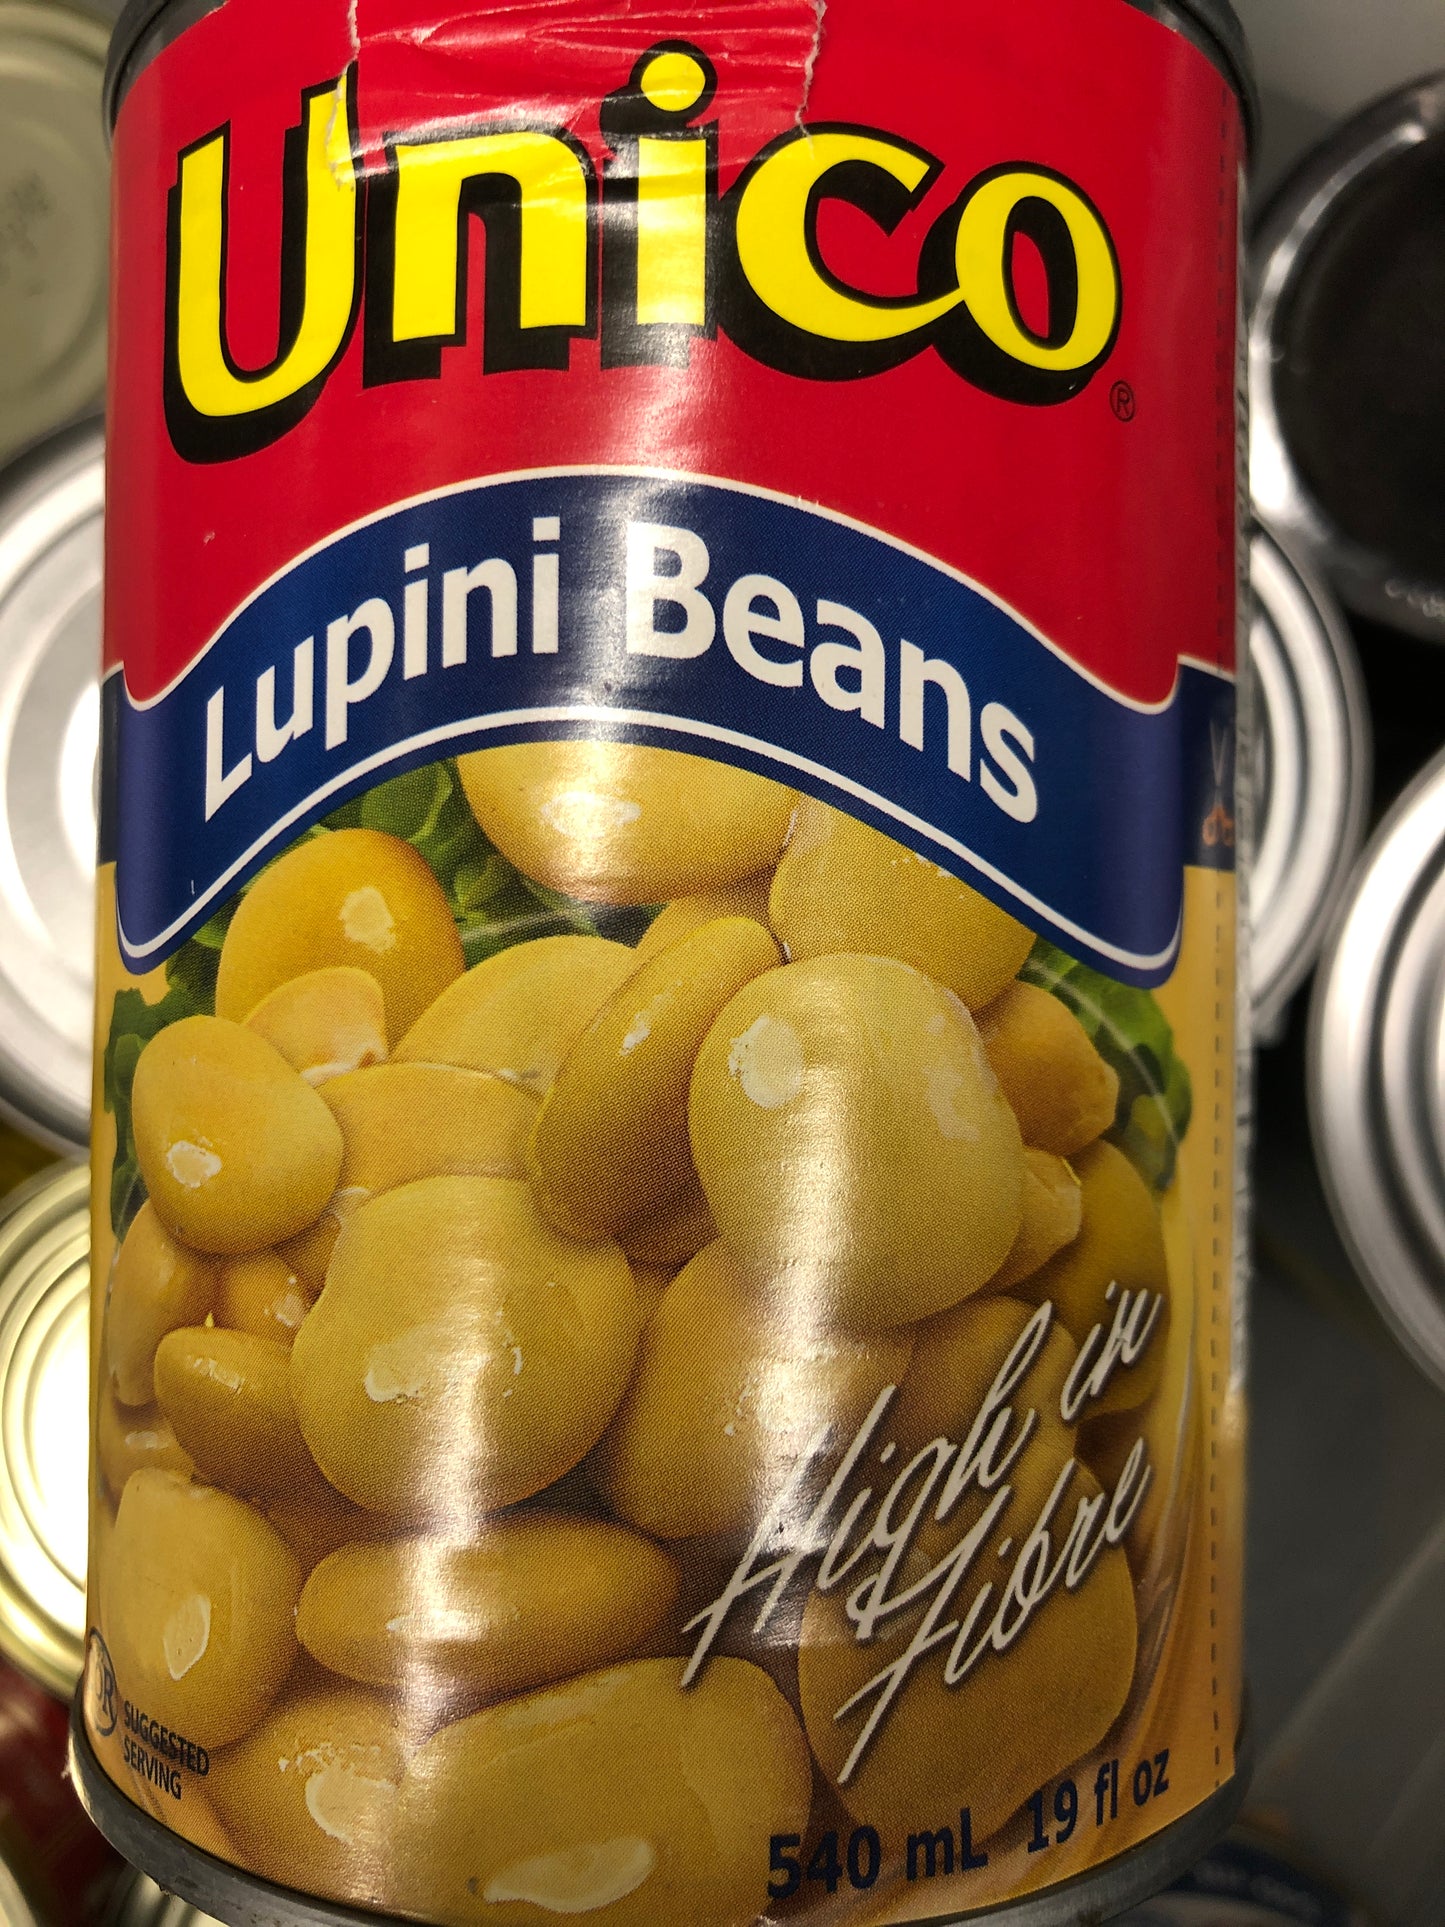 Canned Beans